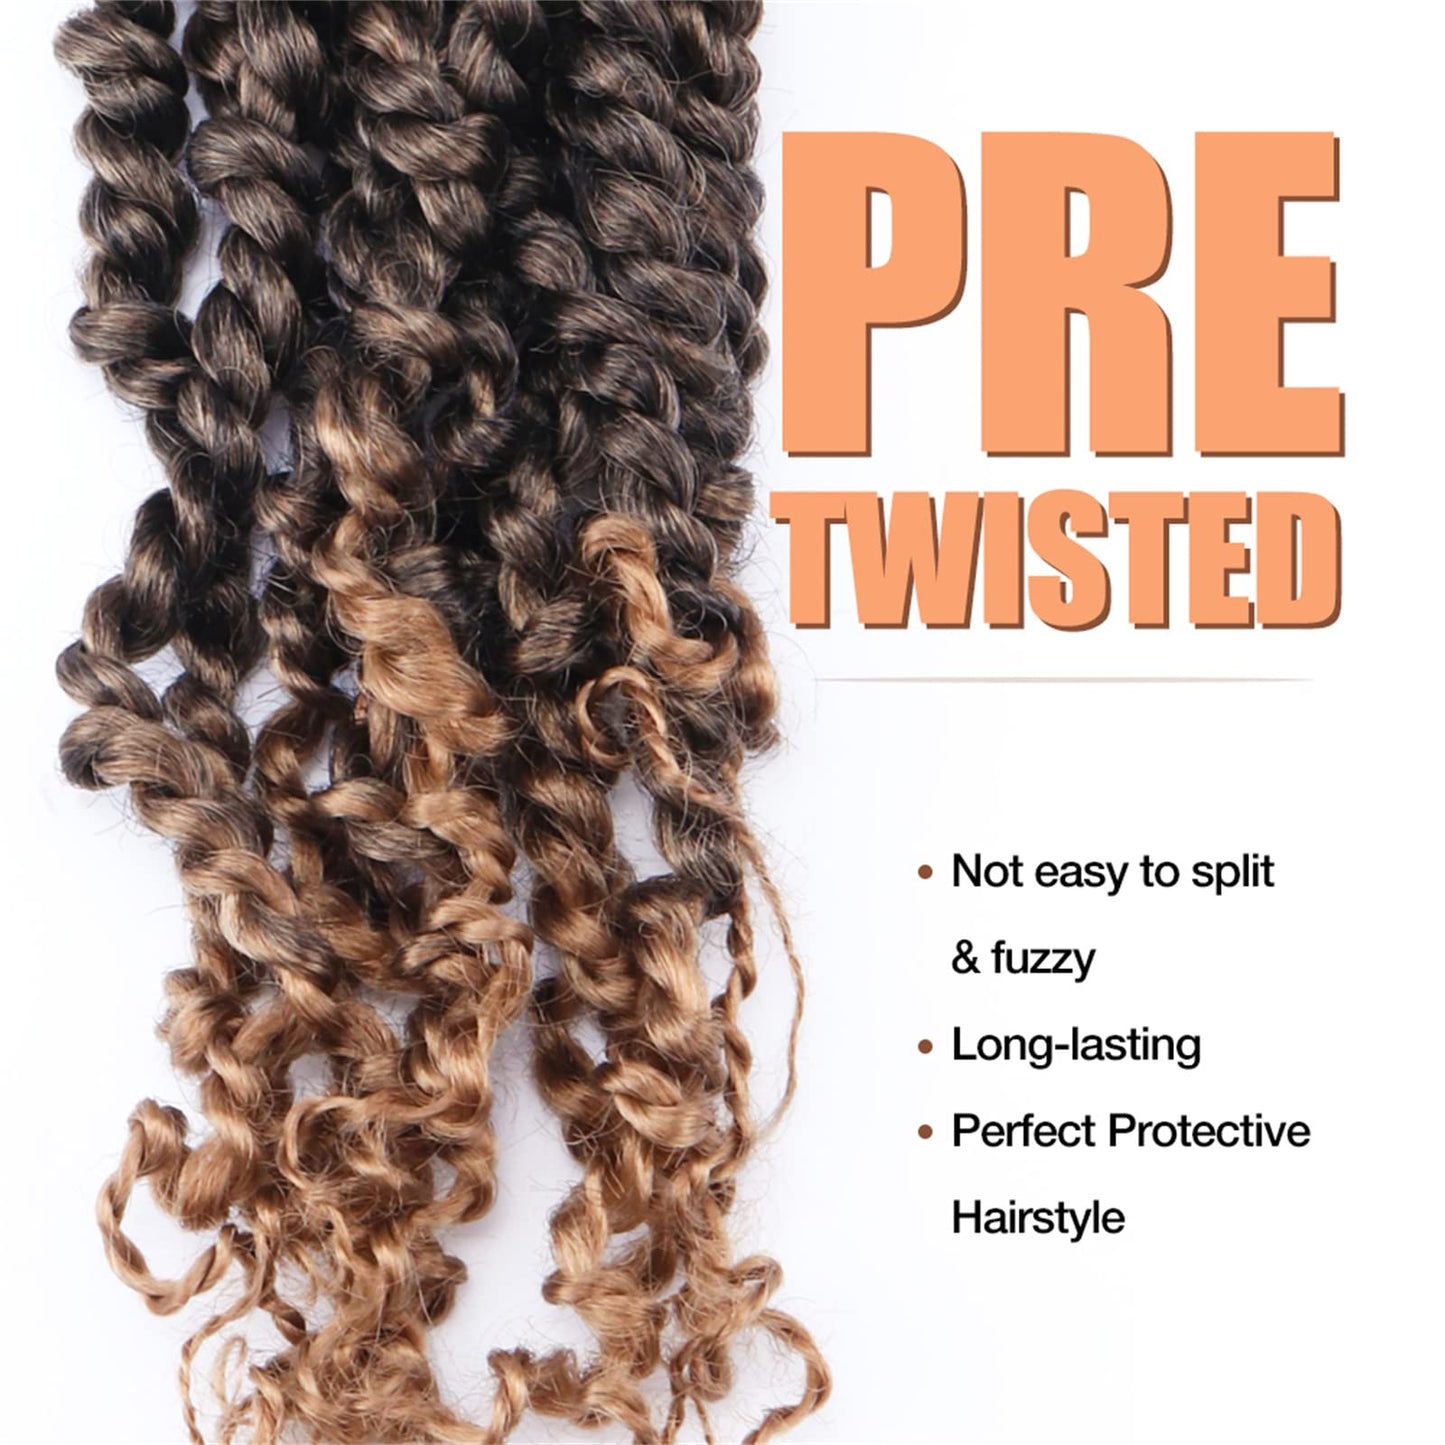 TIANA PASSION TWIST Tiana Passion Twist Hair Ombre Gold Pre-twisted Crochet Hair Pre-looped Passion Twist Braiding Hair Hair Extensions (6 Inch (Pack of 2), T1B/27)